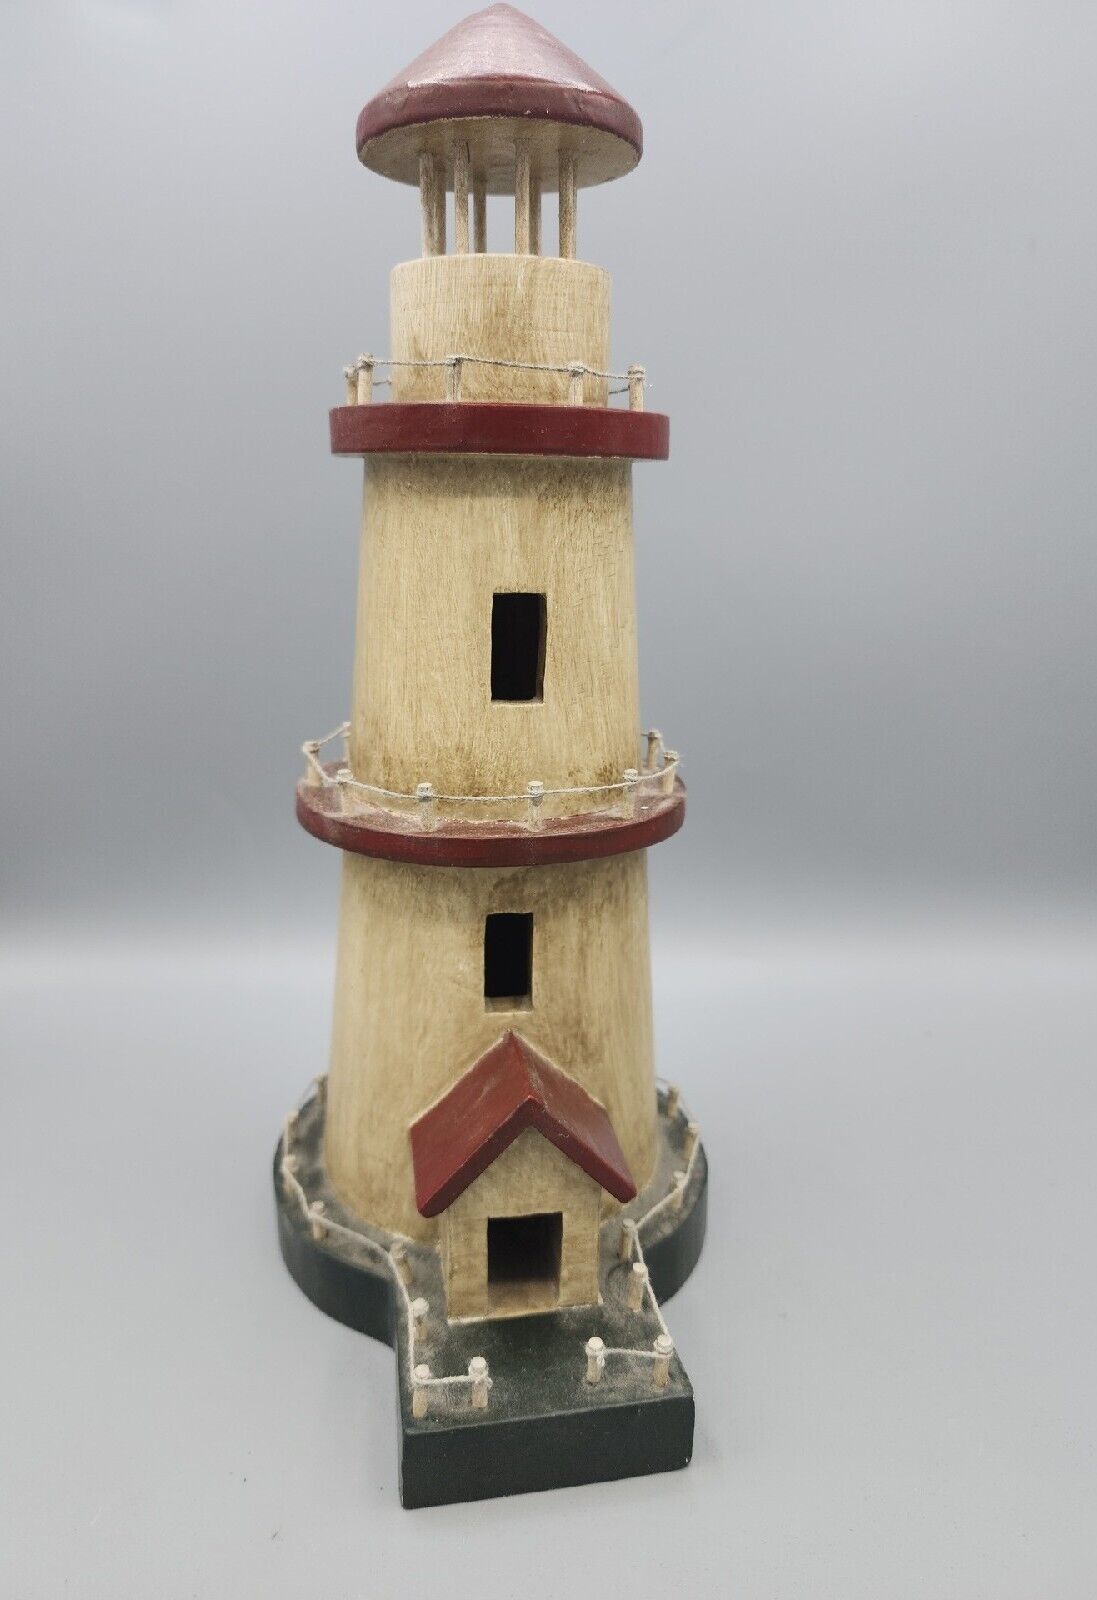 The Heritage Mint Ltd Collectibles Wooden Light House Rustic Nautical Home Decor